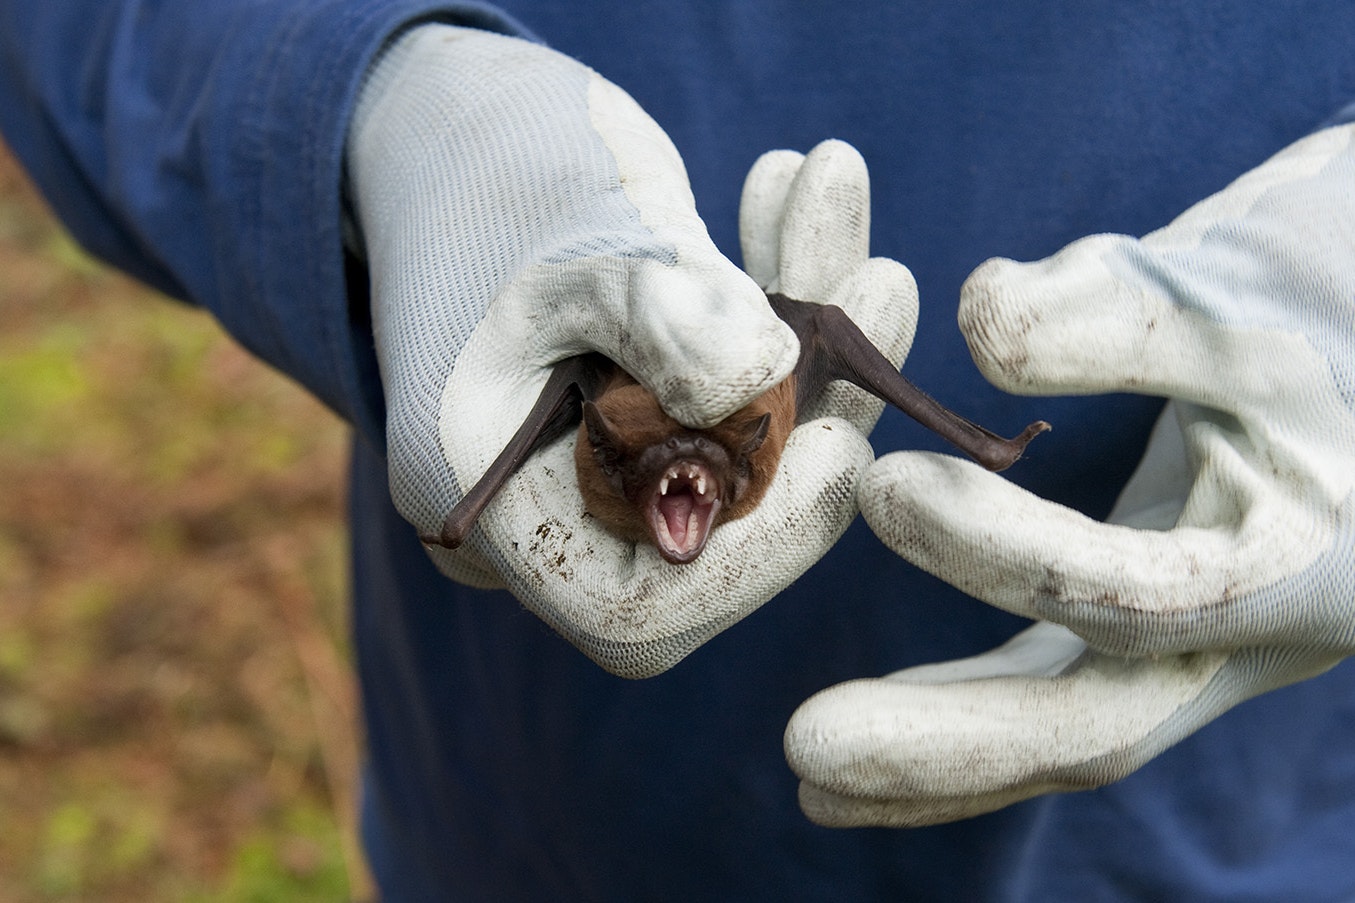 Bats, like the one in this file photo, are a leading carrier of rabies.